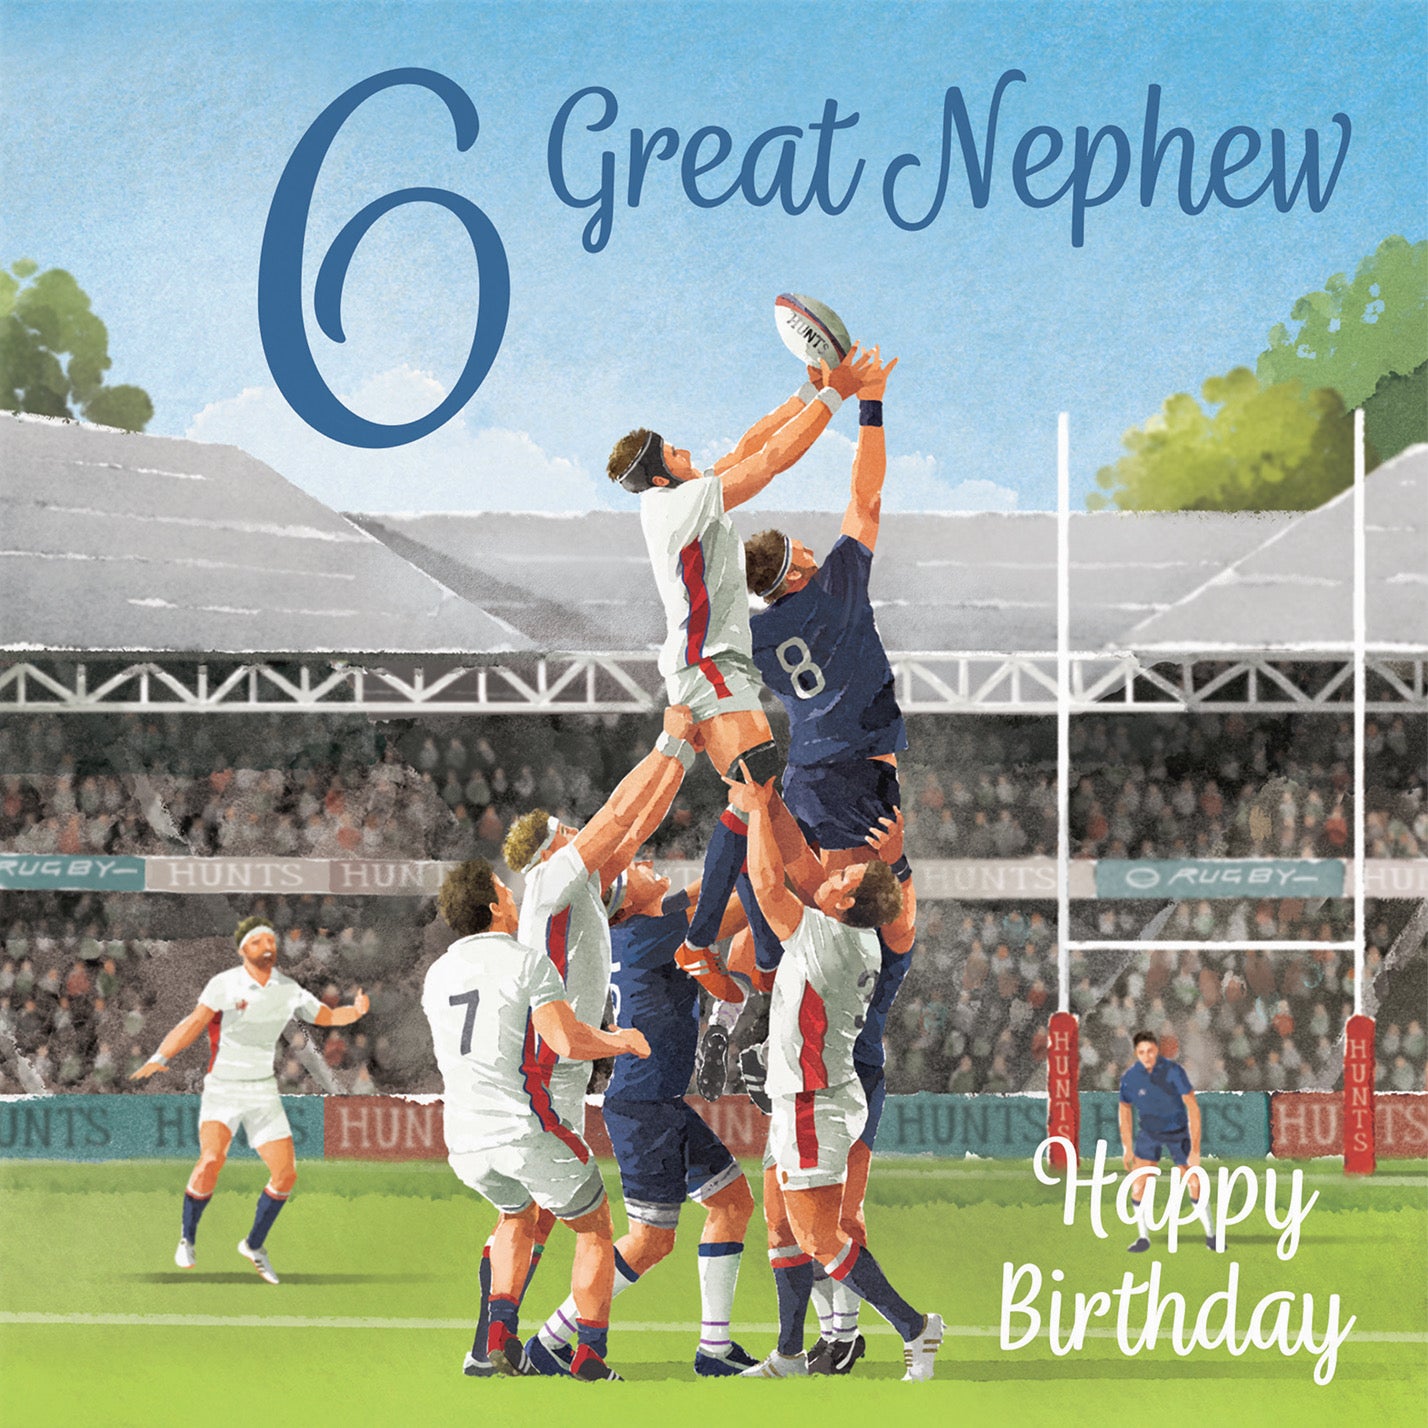 6th Great Nephew Rugby Birthday Card Milo's Gallery - Default Title (B0CPR5TY4S)